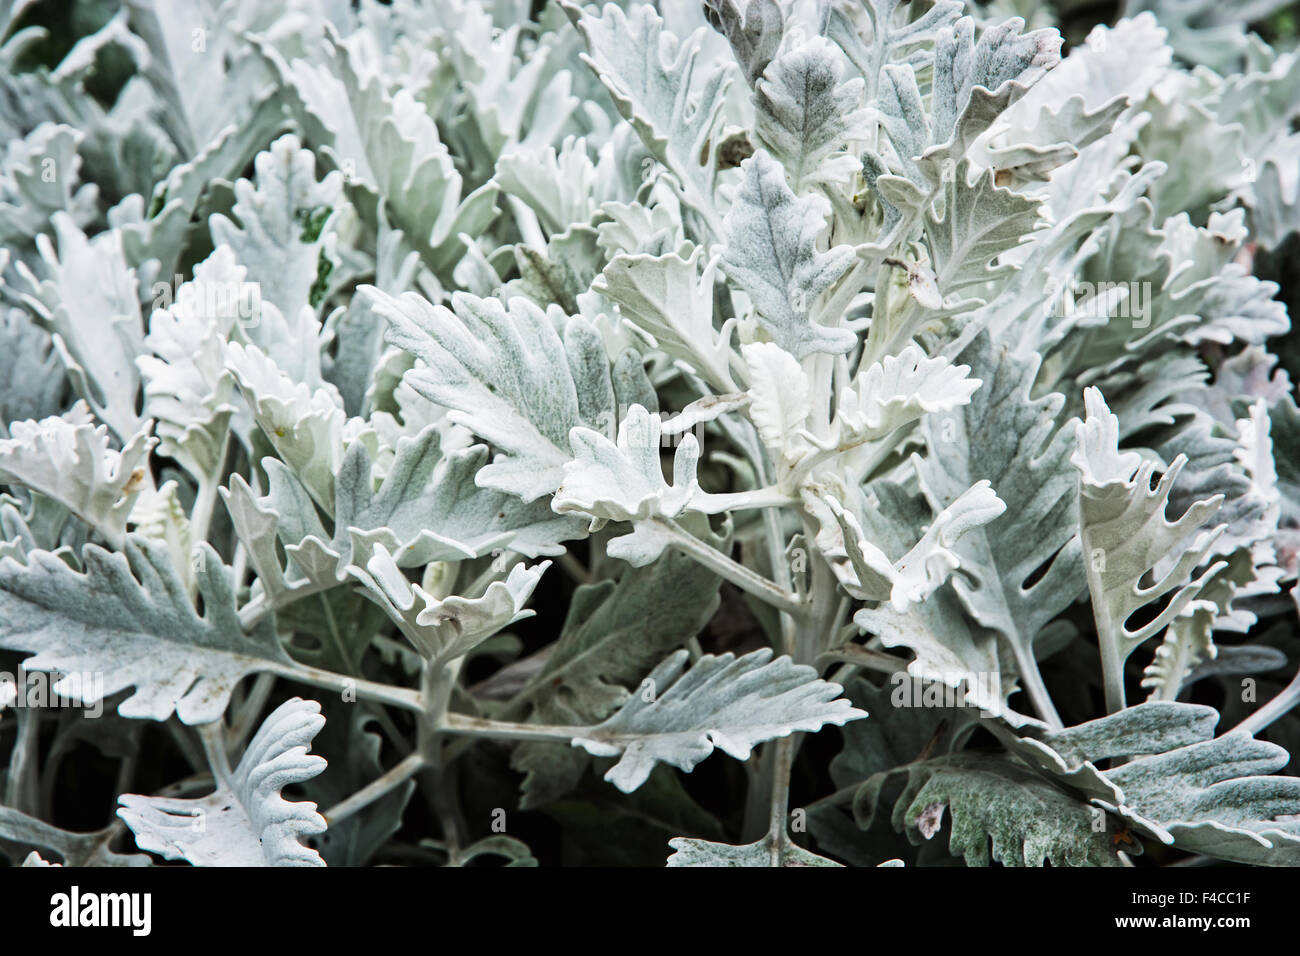 Centaurea cineraria, velvet centaurea, is like some other plants also known as dusty miller and silver dust. Natural theme. Stock Photo